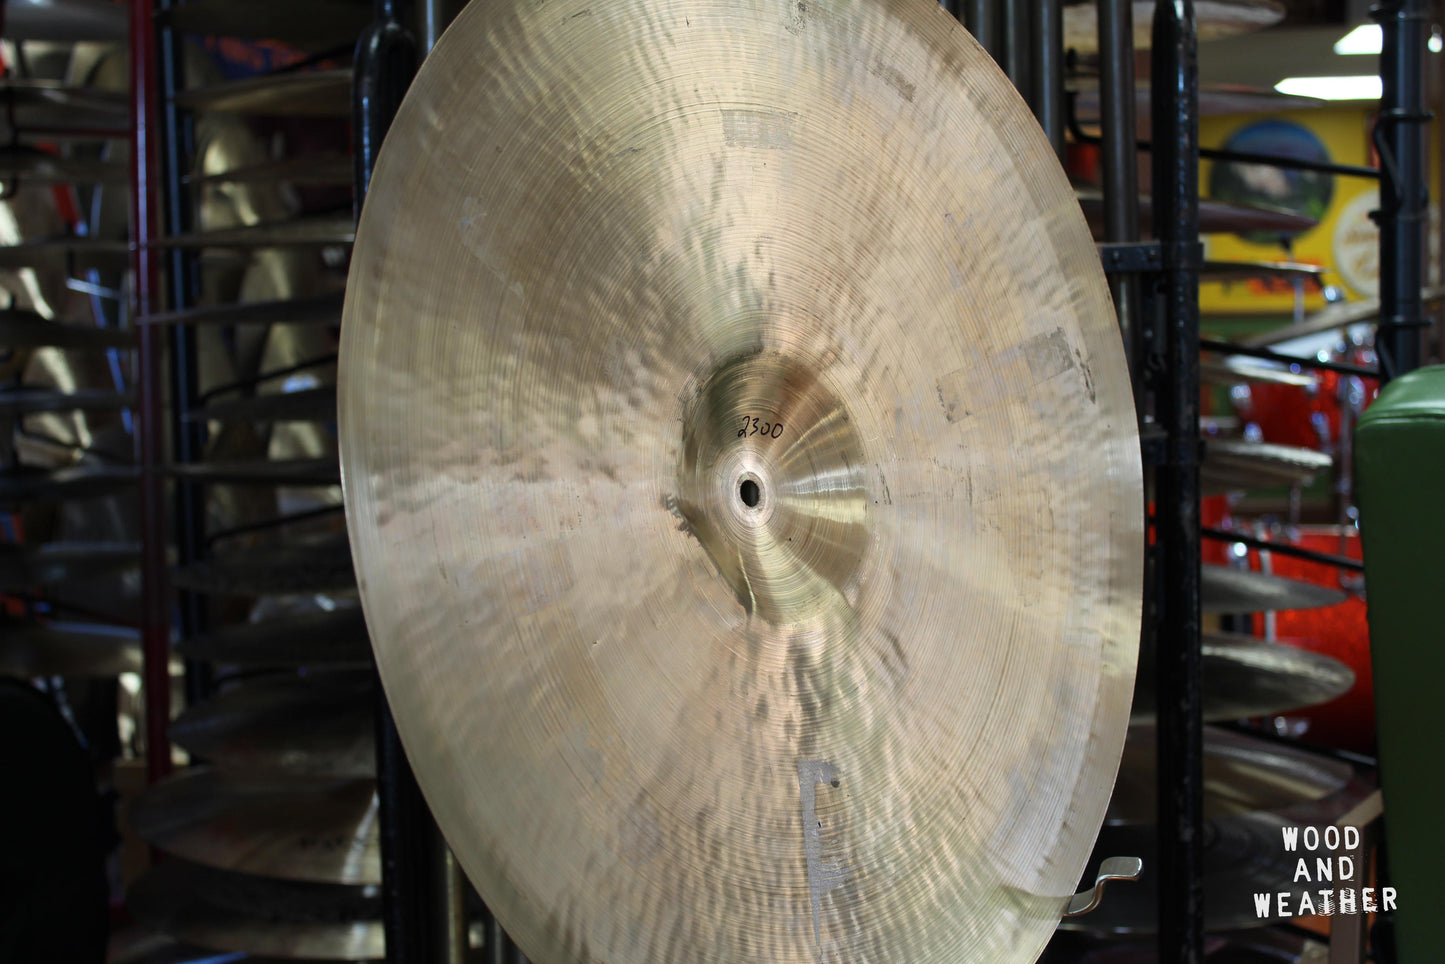 1940s A. Zildjian 21" Trans Stamp Ride Cymbal 2300g – Lathed by Jesse Simpson